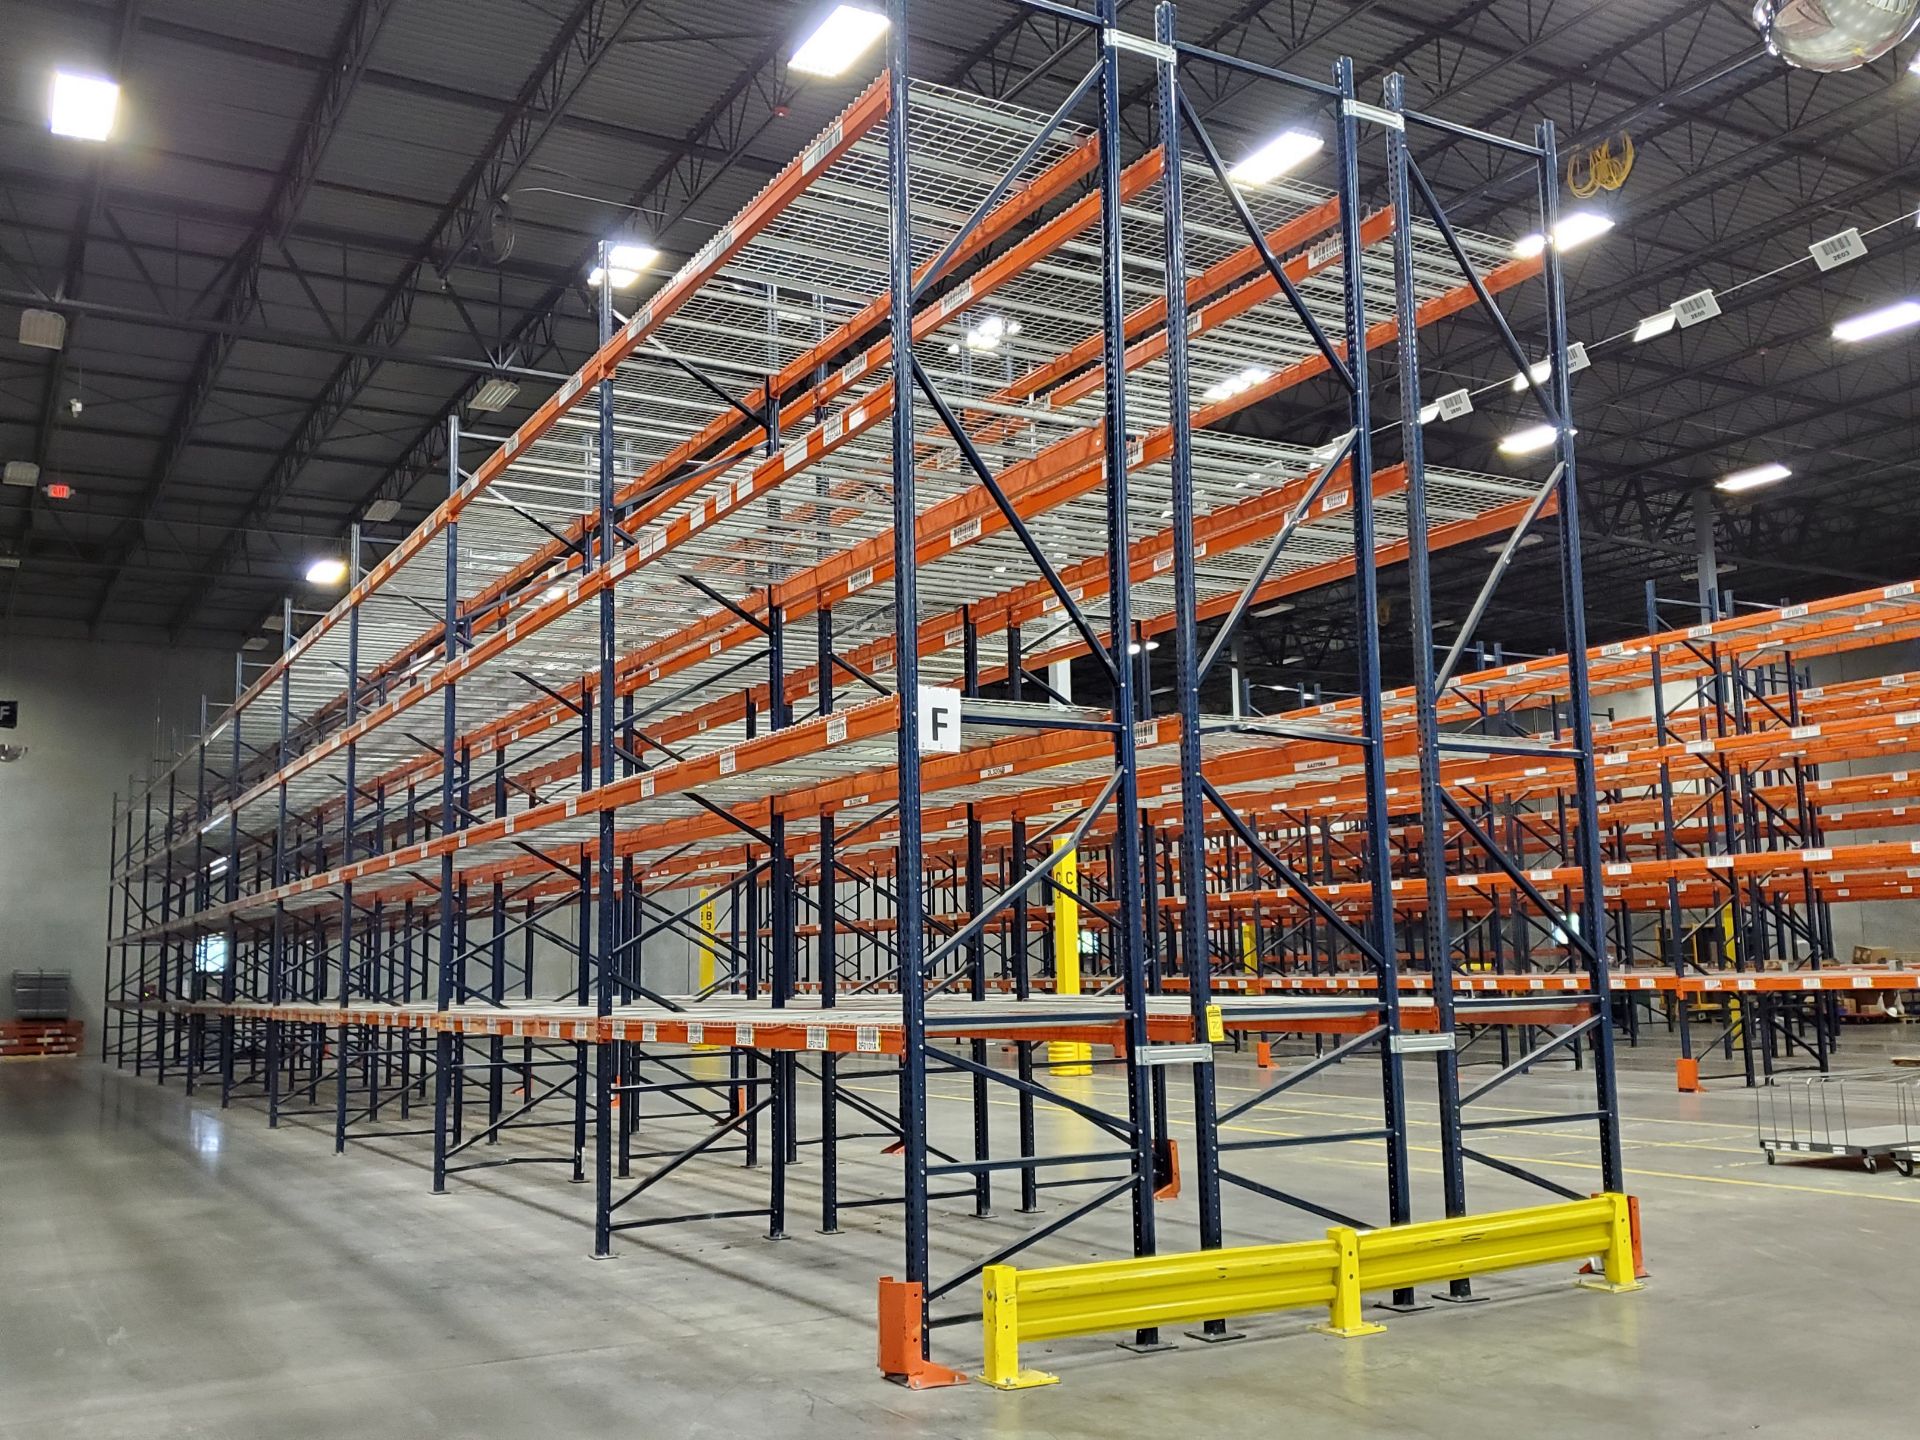 (30) BAYS OF MECULX TEARDROP PALLET RACKING, (33) 21' X 48’‘ UPRIGHTS, (240) 13' X 4-3/4-6.5" BEAMS - Image 2 of 7